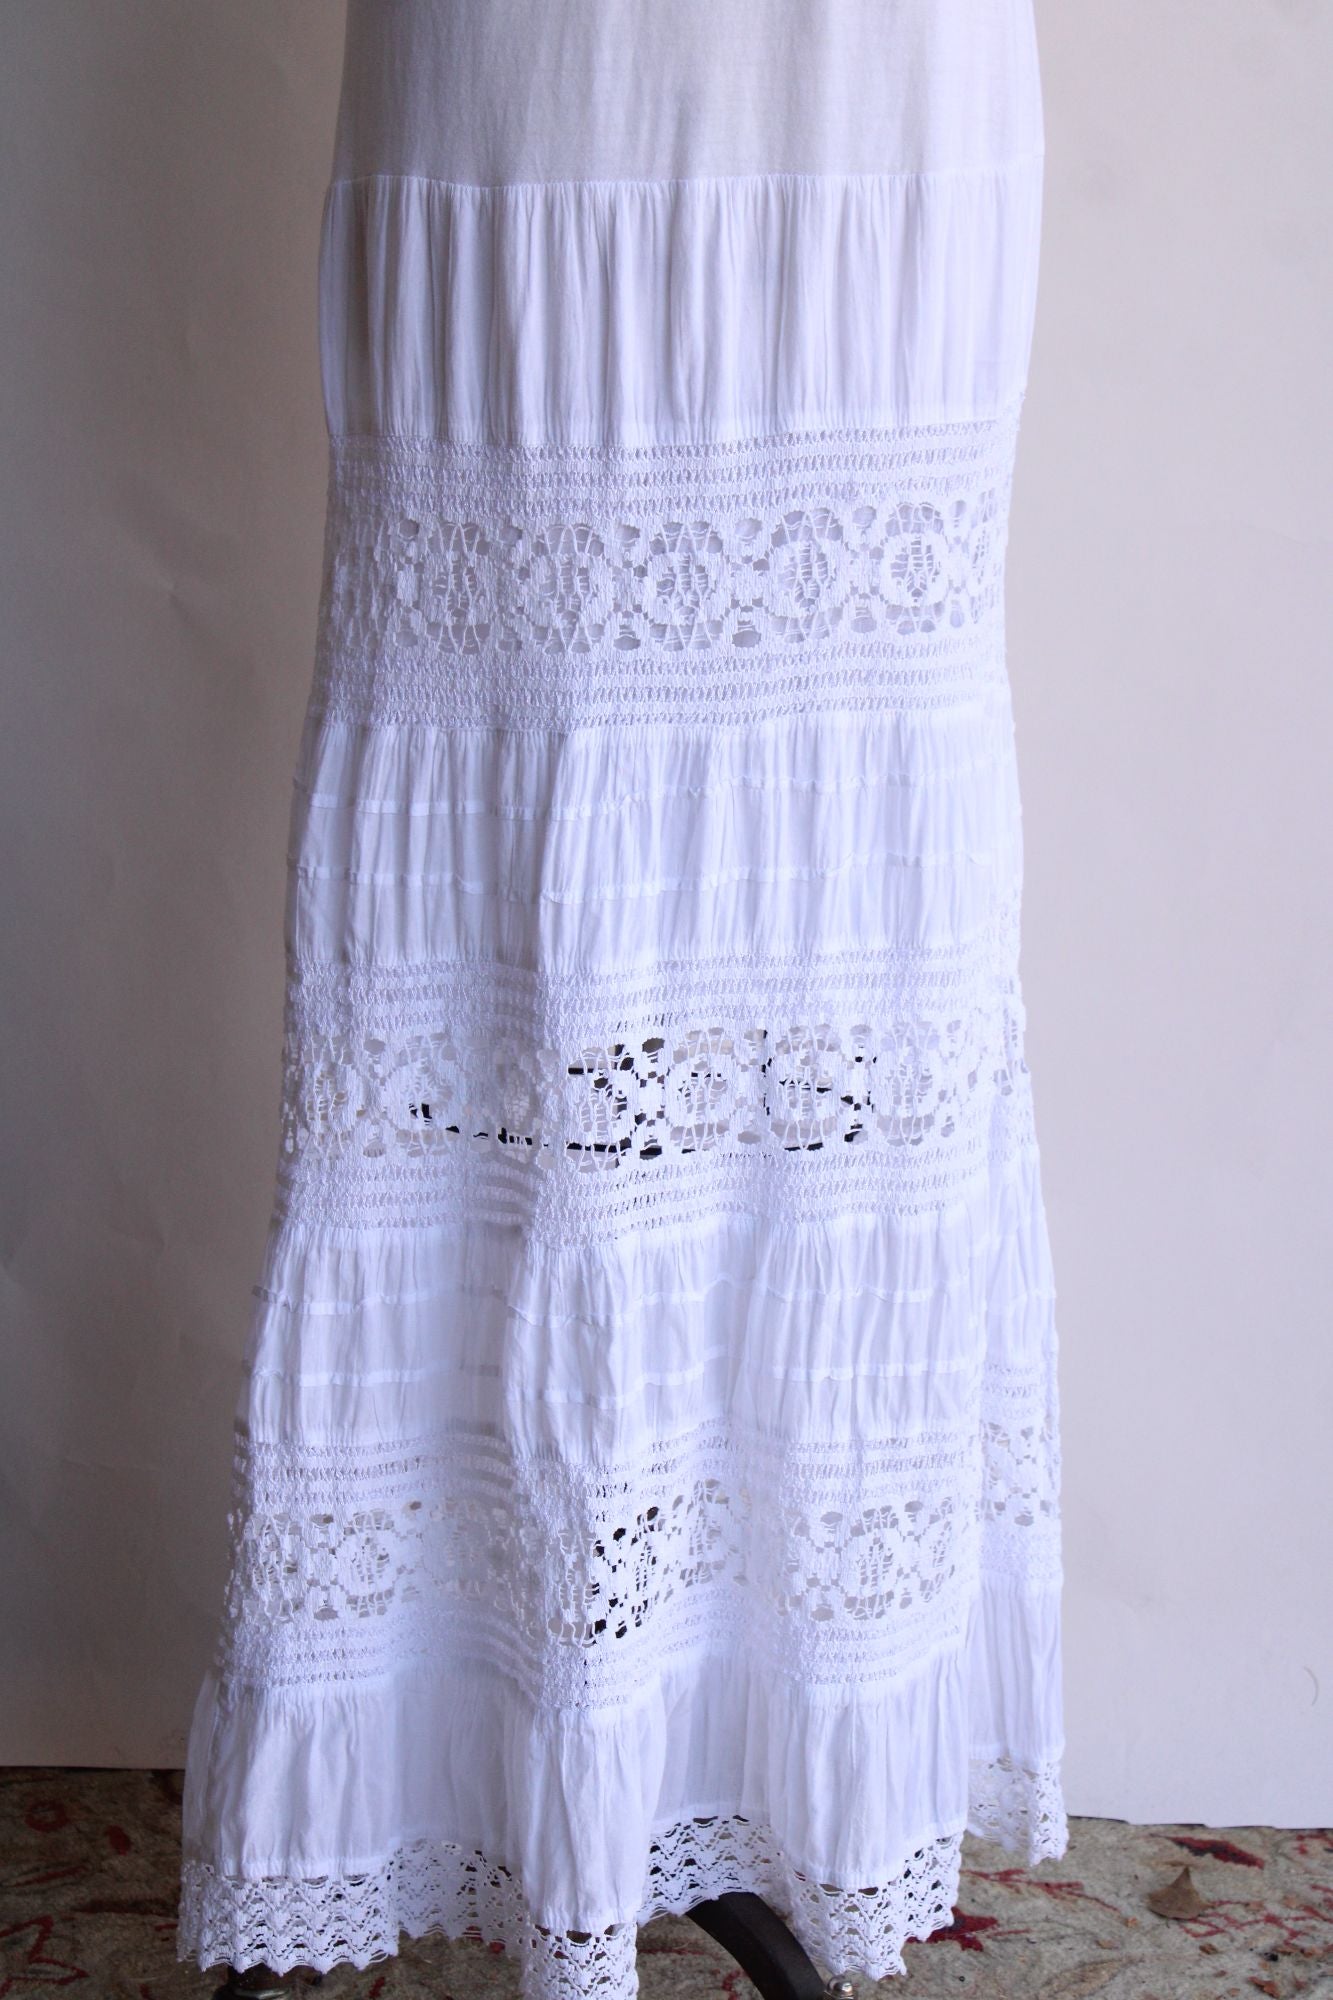 Cute Options Womens Maxi Dress, White Cotton and Lace, Size S/M